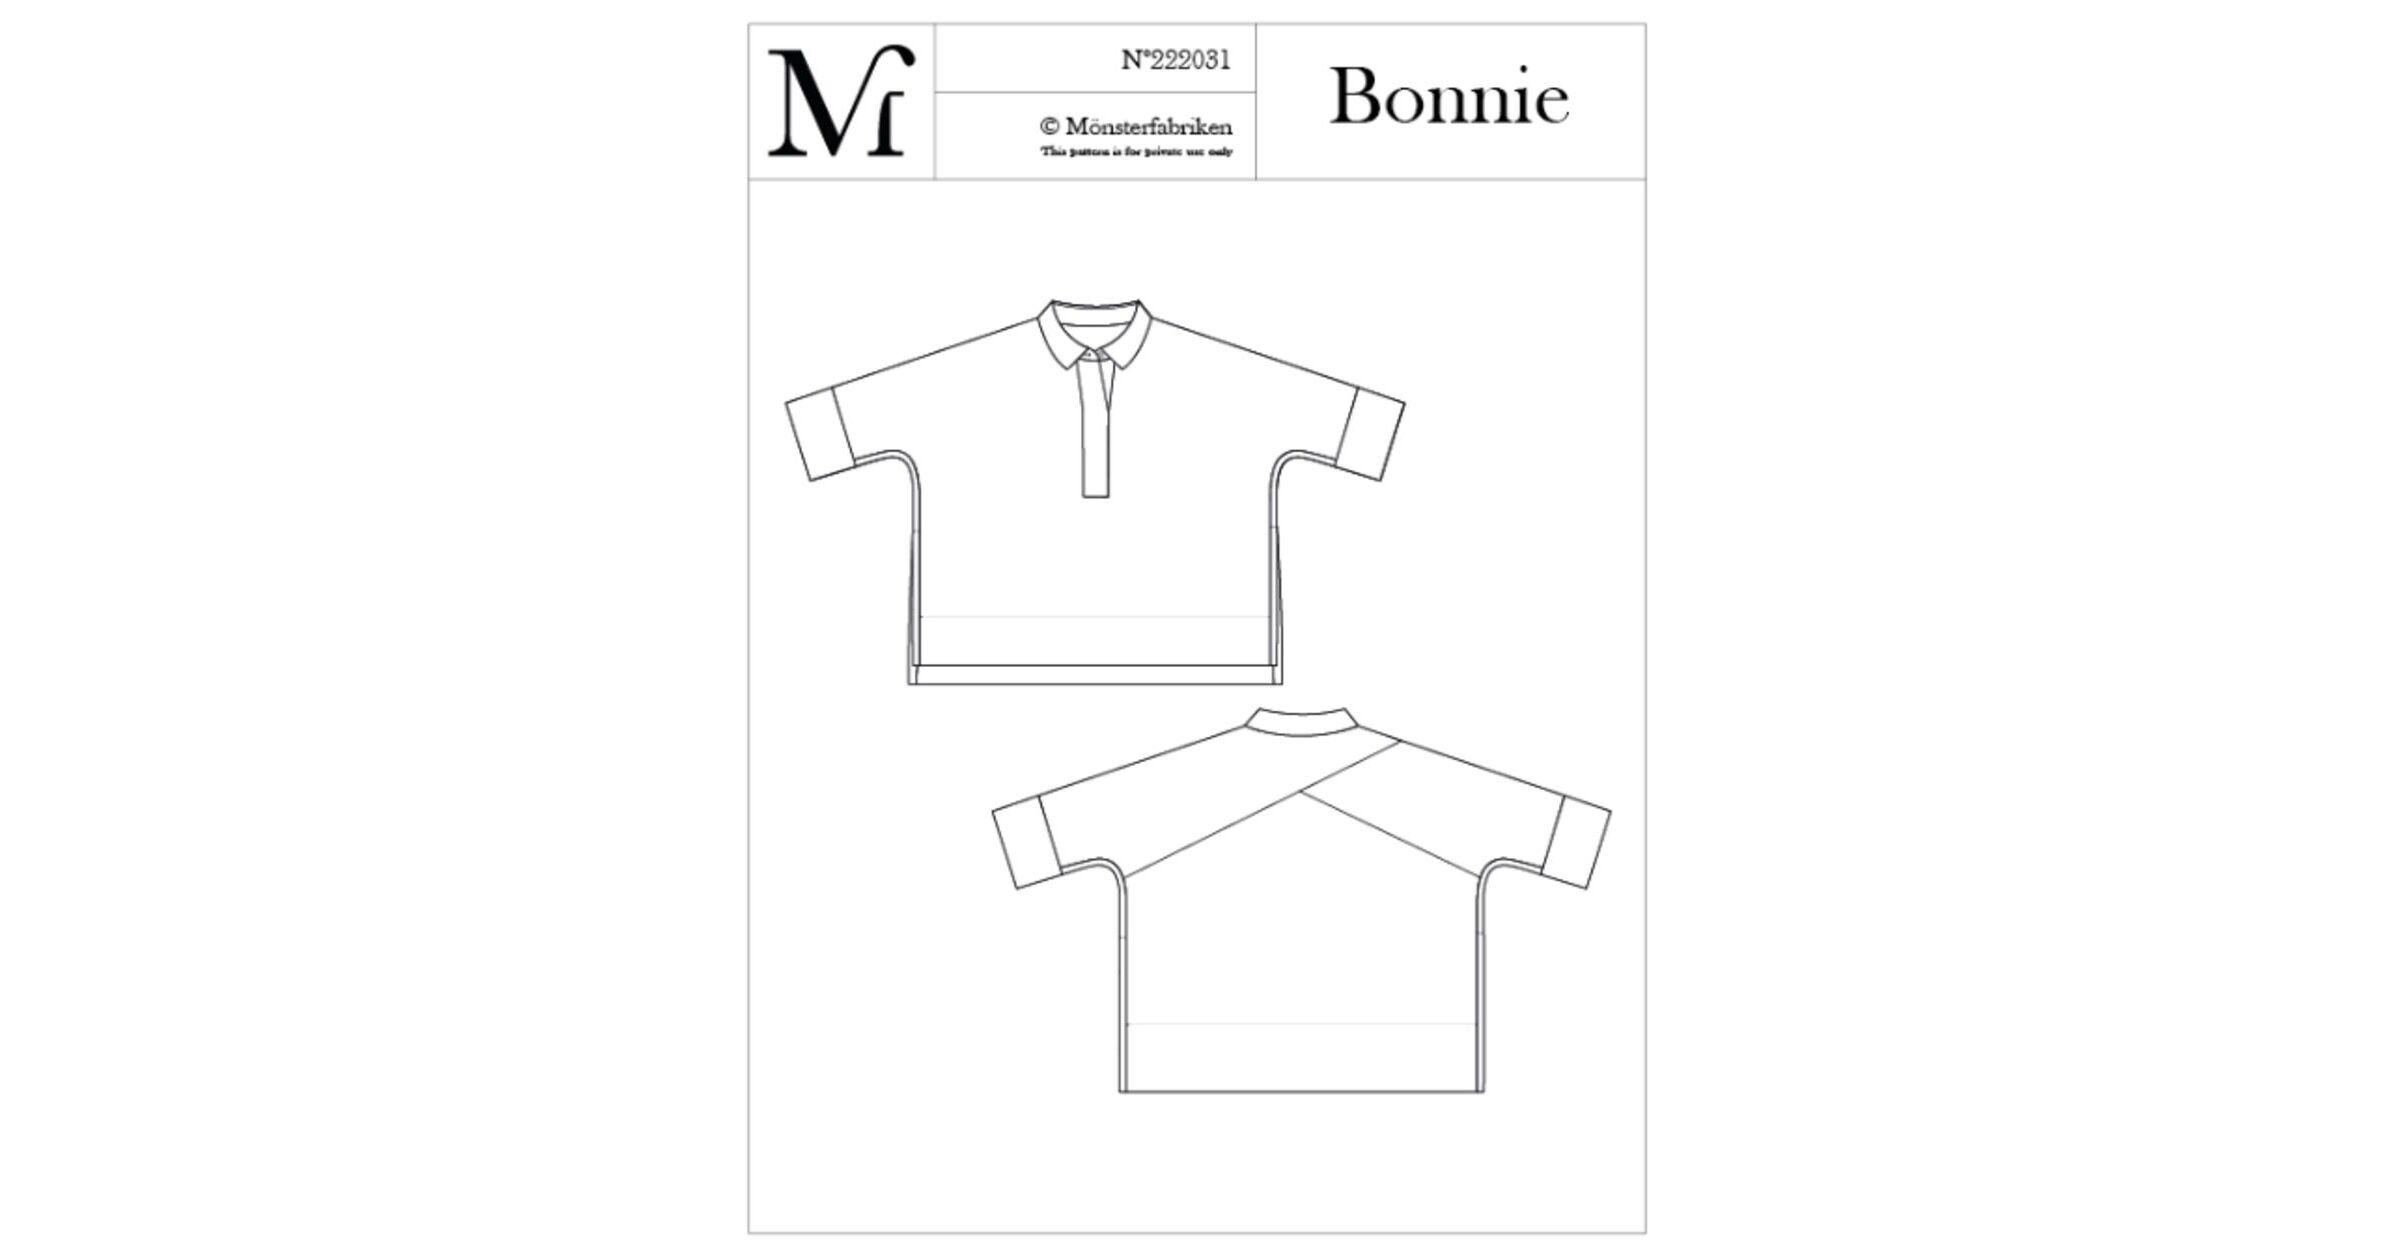 The Bonnie Top Paper Sewing Pattern